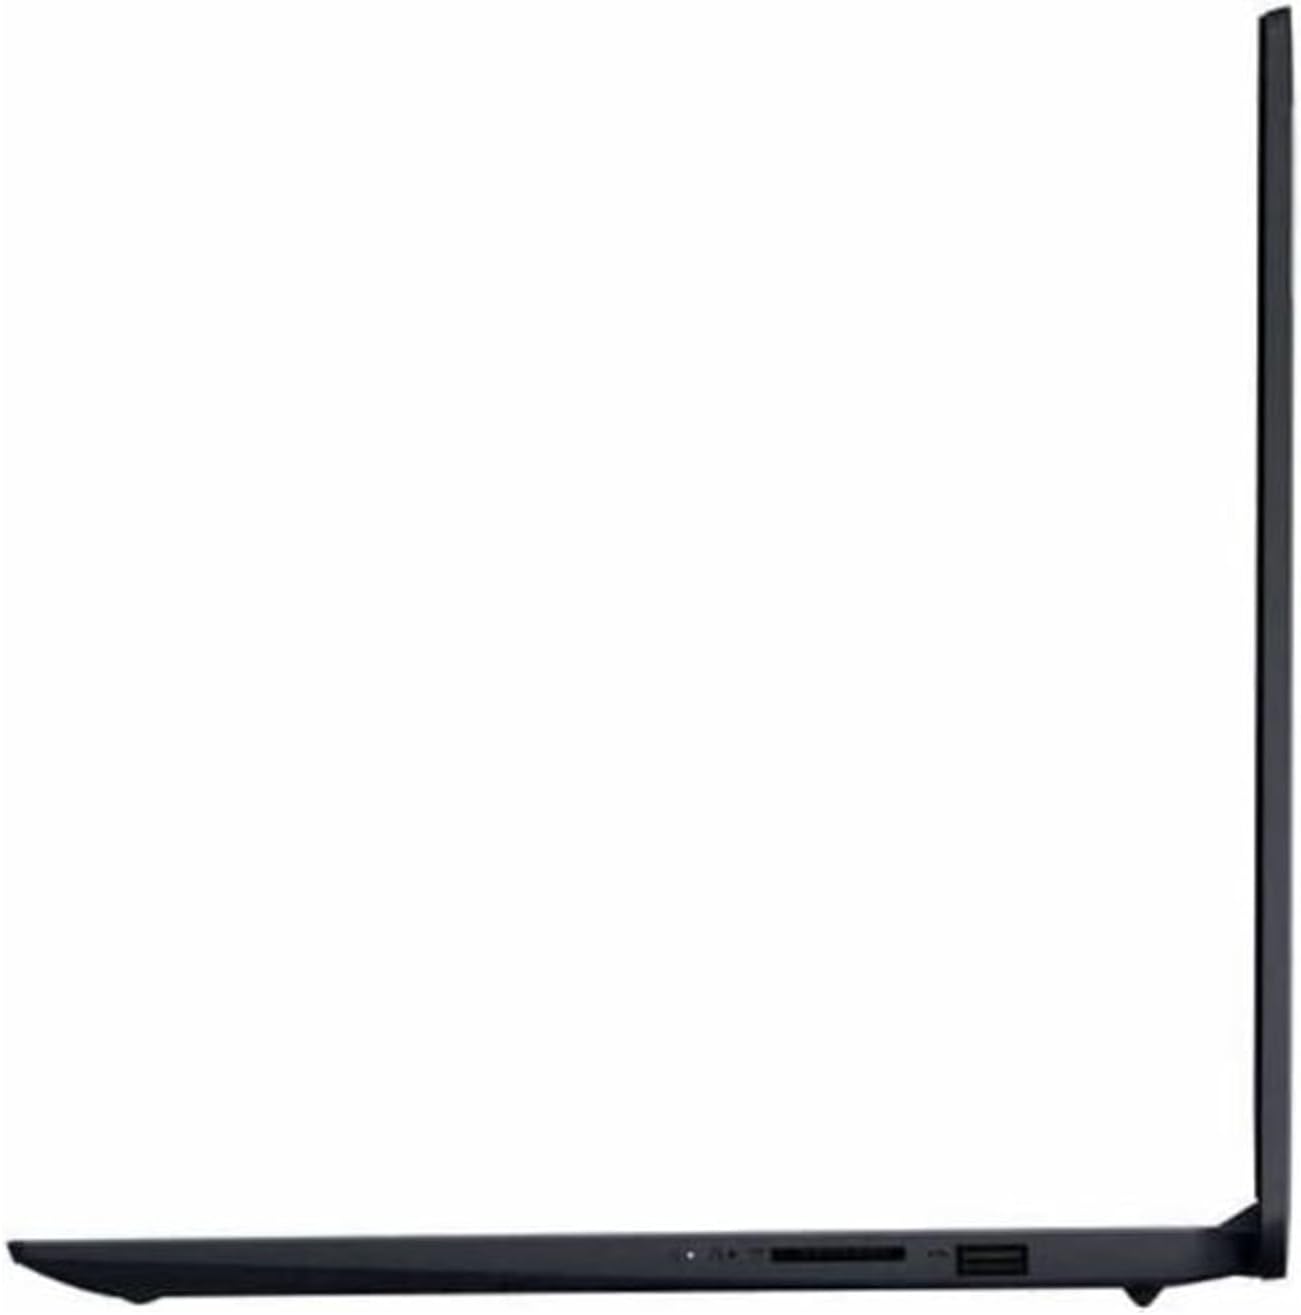 2023 Newest Upgraded IdeaPad 1i Laptops for Student  Business by Lenovo, 15.6 FHD Computer, Intel 4-Core CPU, 20GB RAM, 1152GB(128GB+1TB)SSD, Wi-Fi, HDMI, Windows 11, Long Battery Life, ROKC Bundle